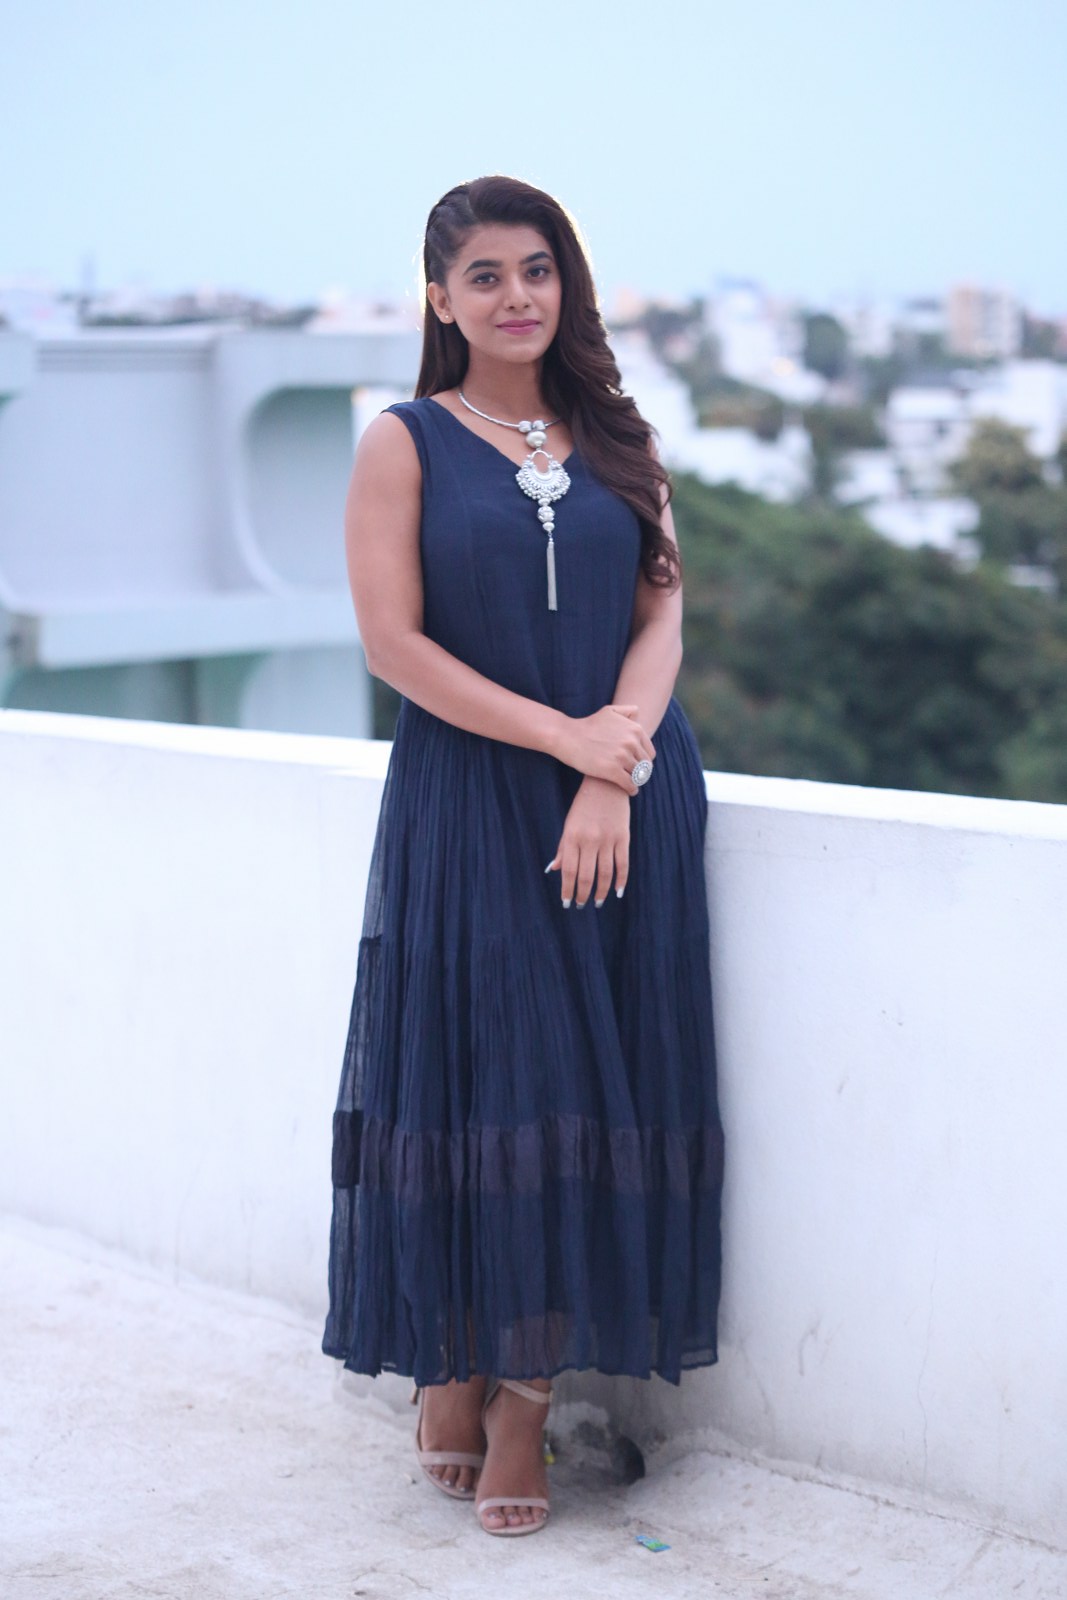 Yamini bhaskar latest photos 2- Photos,Spicy Hot Pics,Images,High Resolution WallPapers Download